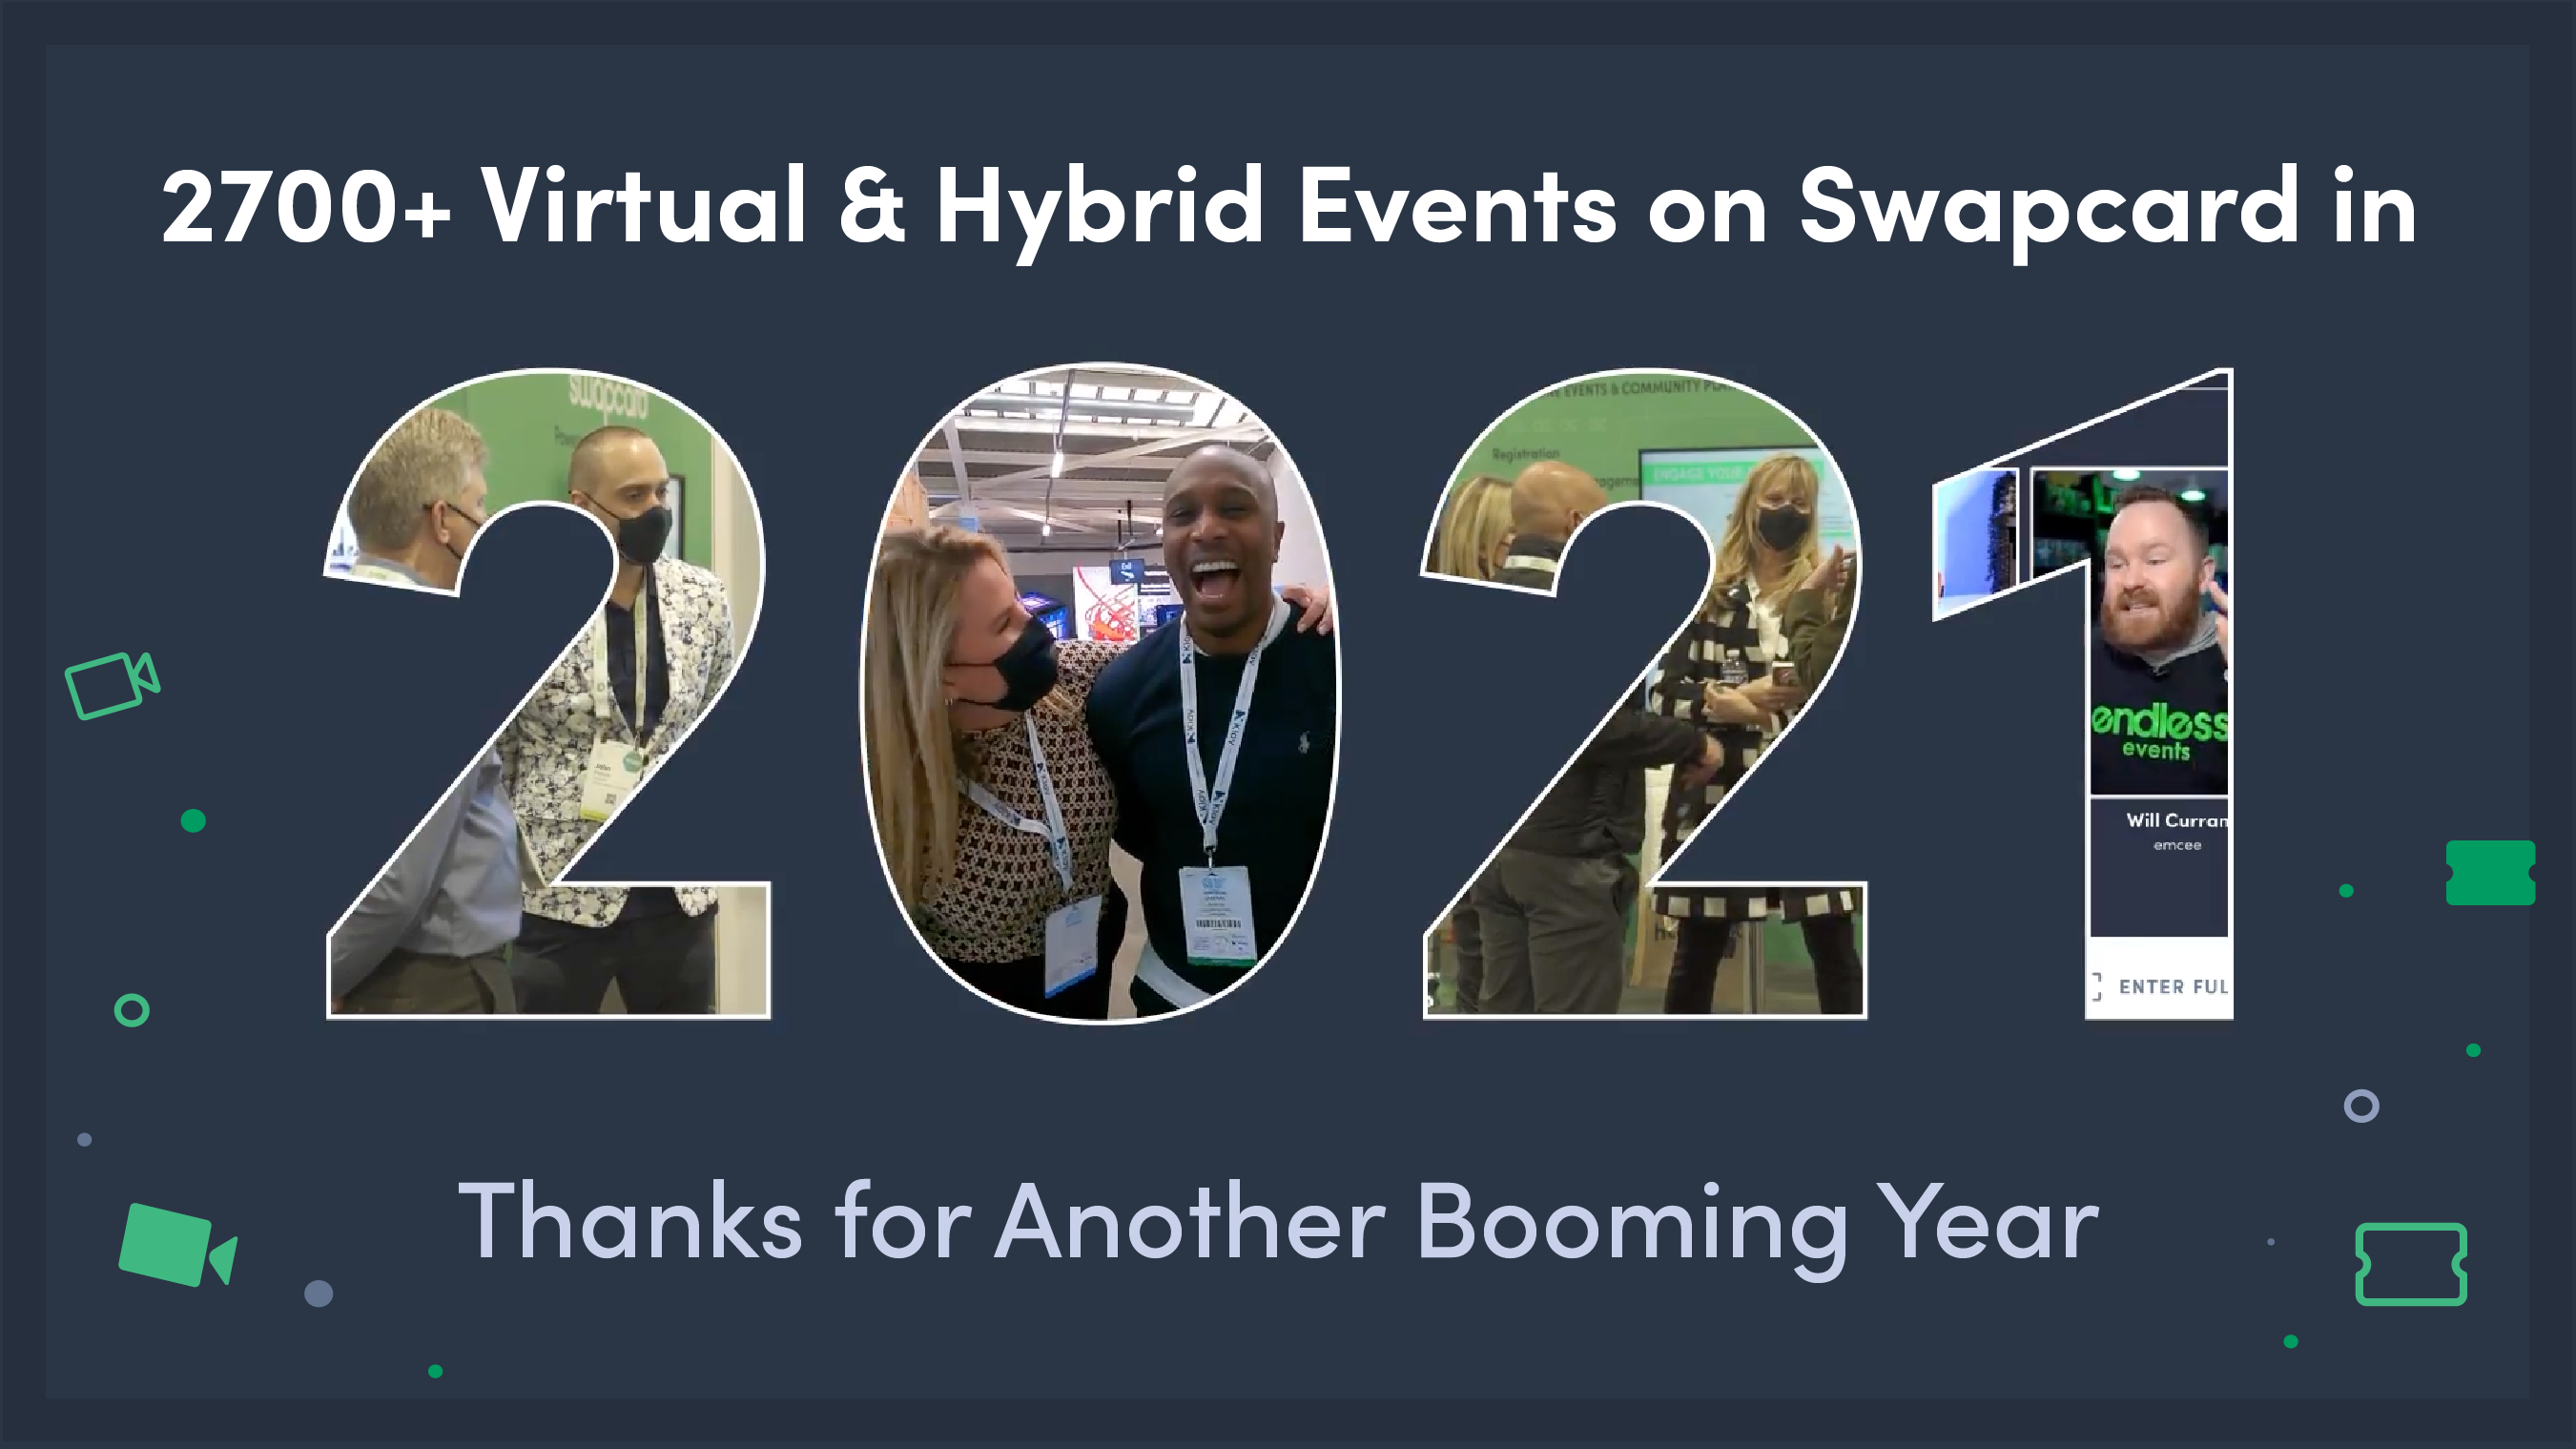 2700+ Virtual & Hybrid Events on Swapcard in 2021 - Thanks for Another Booming Year